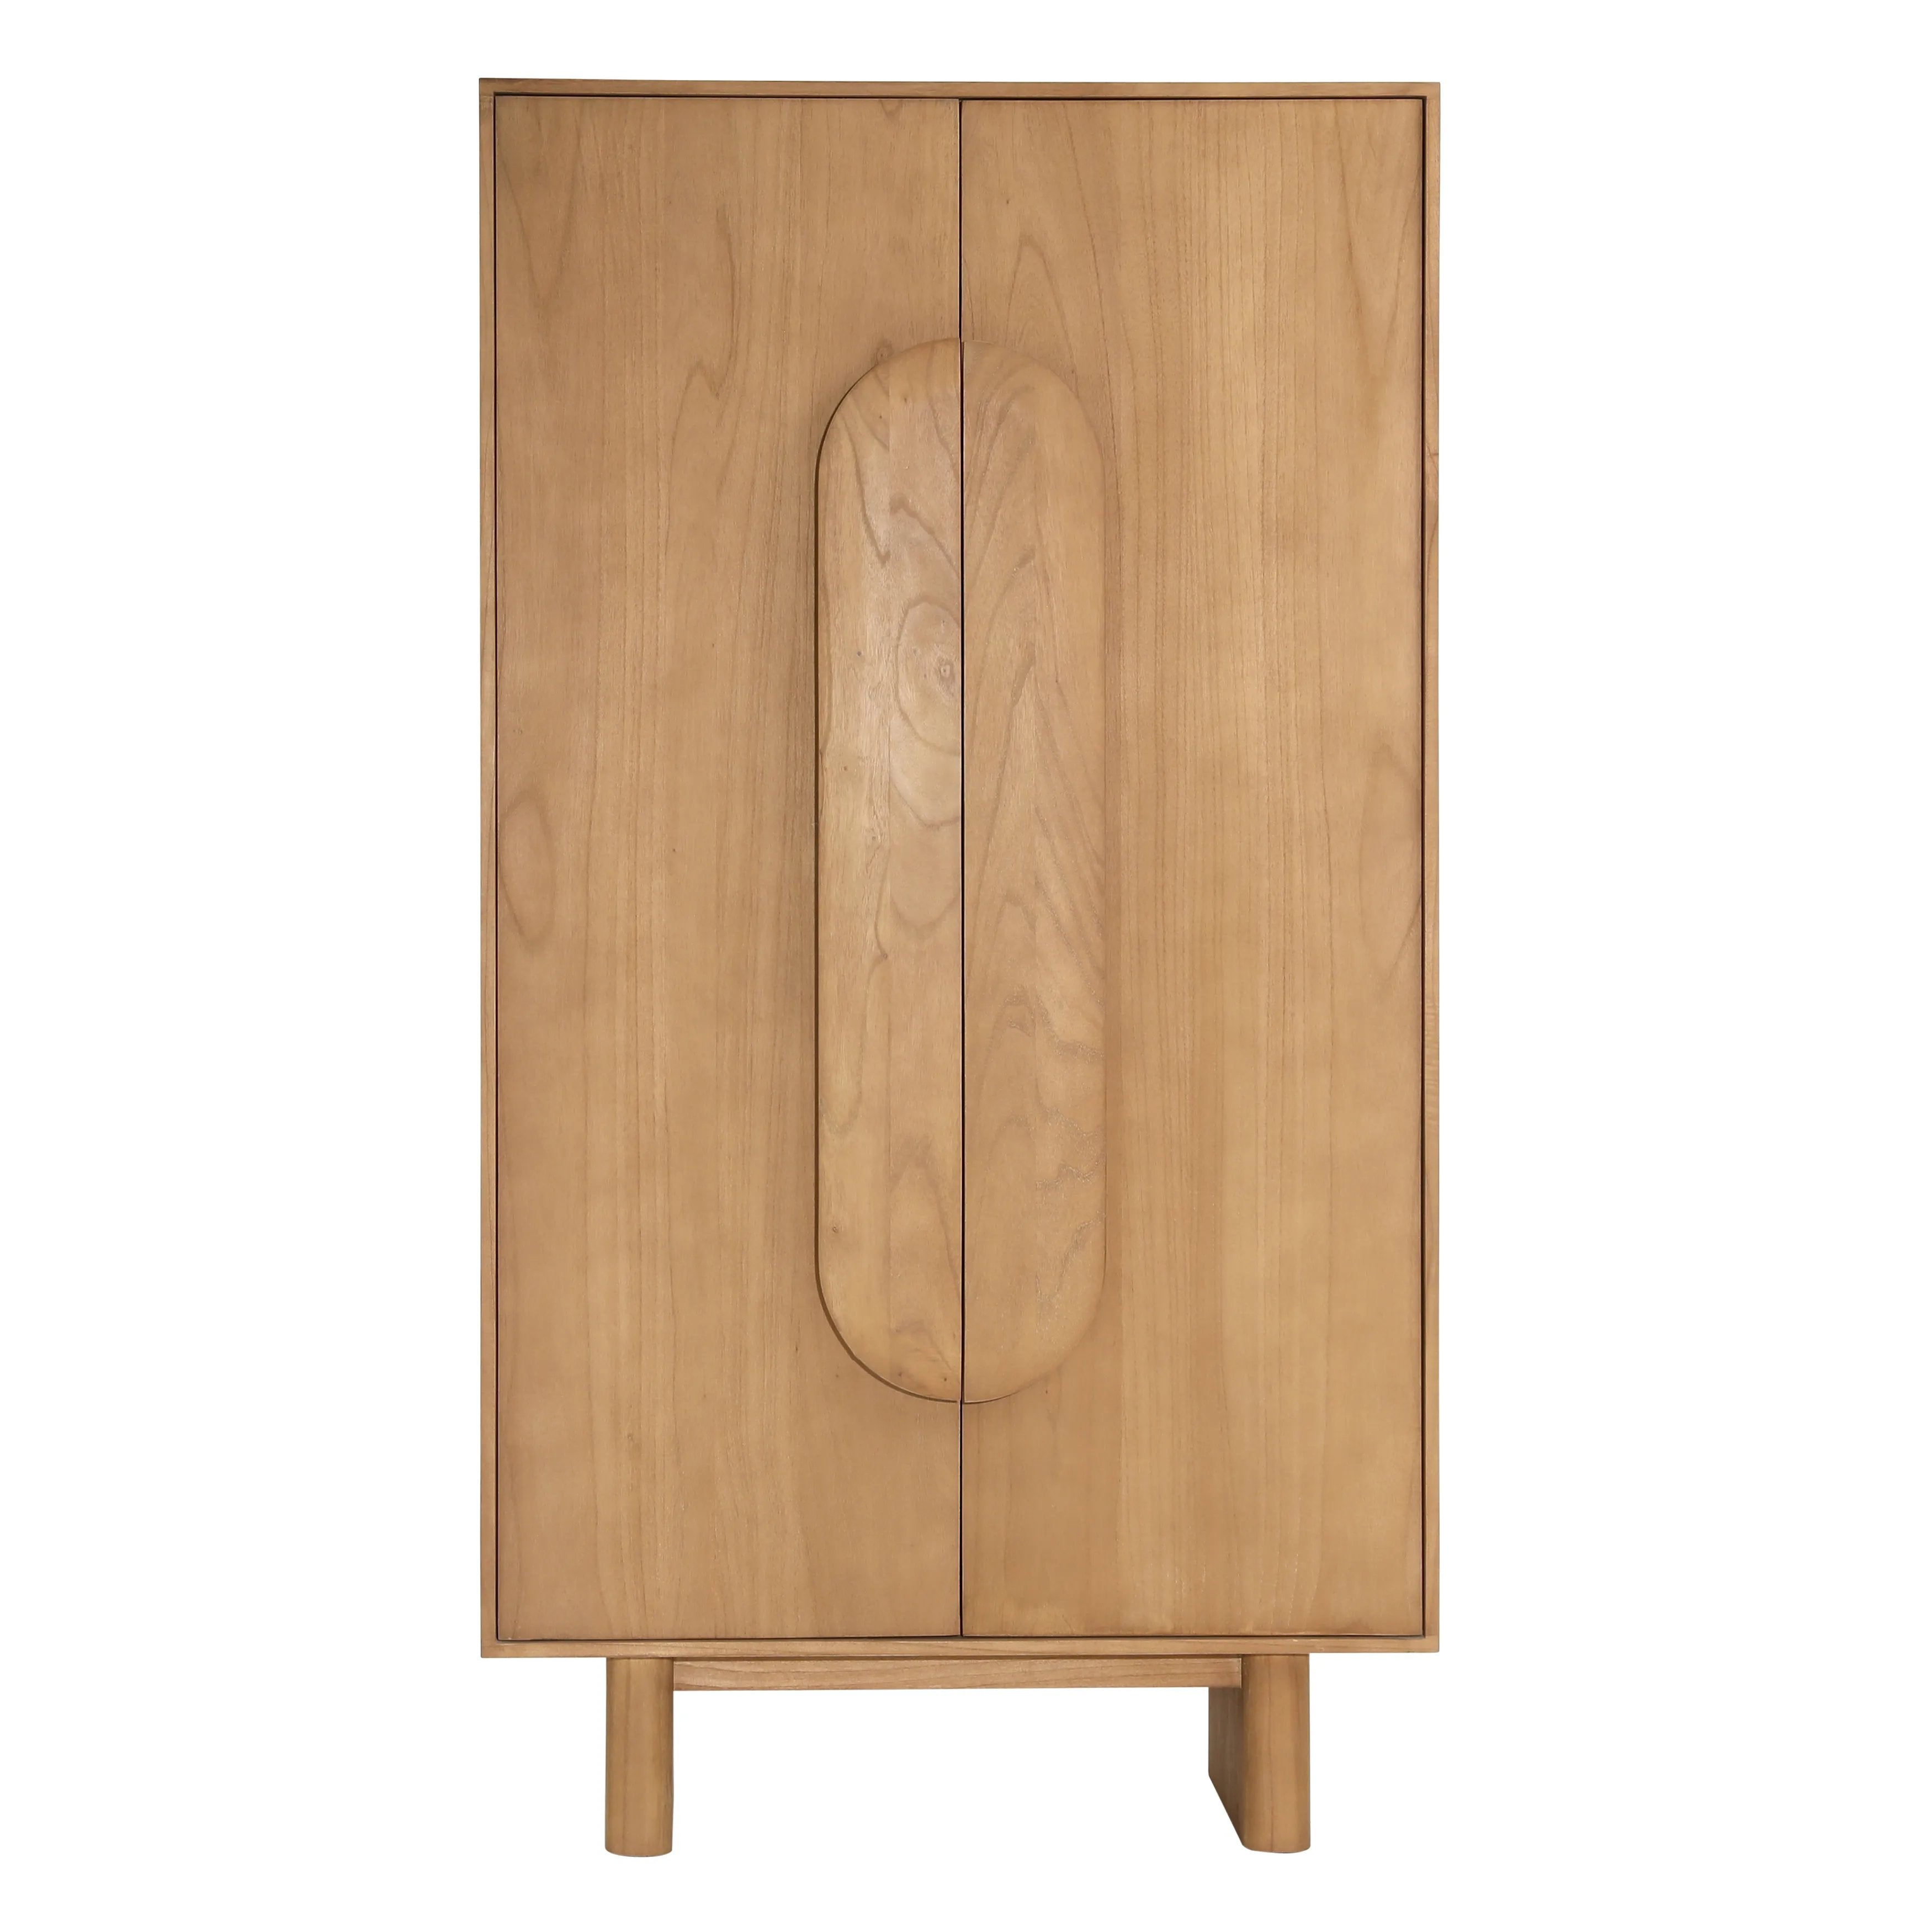 Beautify your living space with the Jada Natural Cabinet. Crafted from wood with a natural finish, this cabinet has ample storage that'll help you organize your space. Enjoy a clean, timeless look for years to come Amethyst Home provides interior design, new home construction design consulting, vintage area rugs, and lighting in the Calabasas metro area.